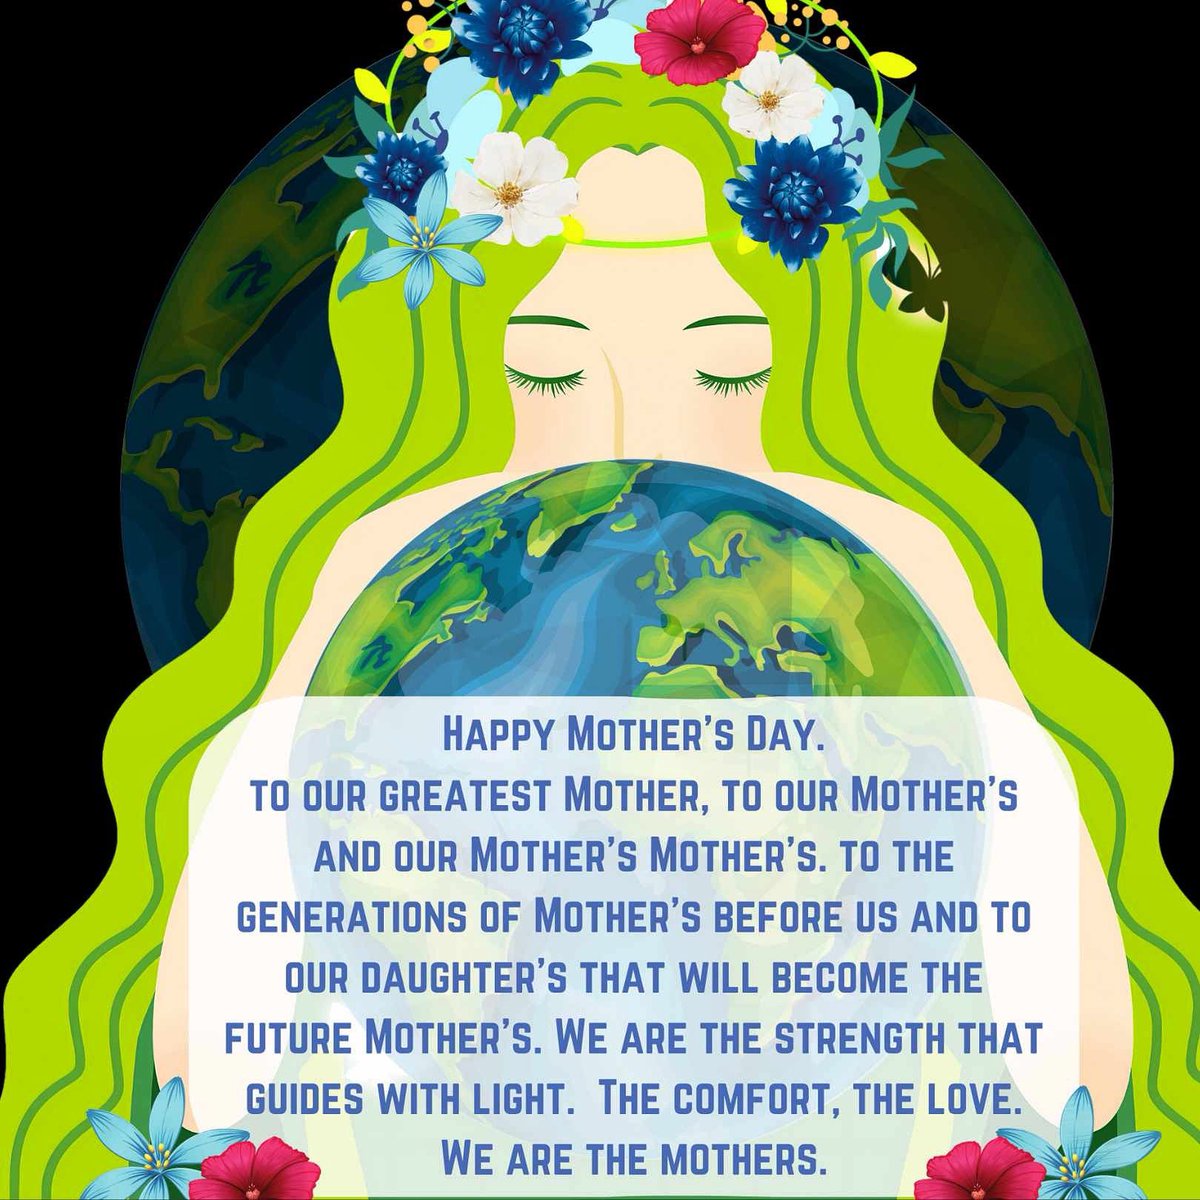 Happy Mother’s Day Plant Lovers, Pet Lovers and Sacred Mothers of Yesterday, Tomorrow and Today! 💝🌱🐶🐱👵🏻🧑🏾🤰🏻 #mothersday #motherearth #sacredfeminine #sacredmotherhood